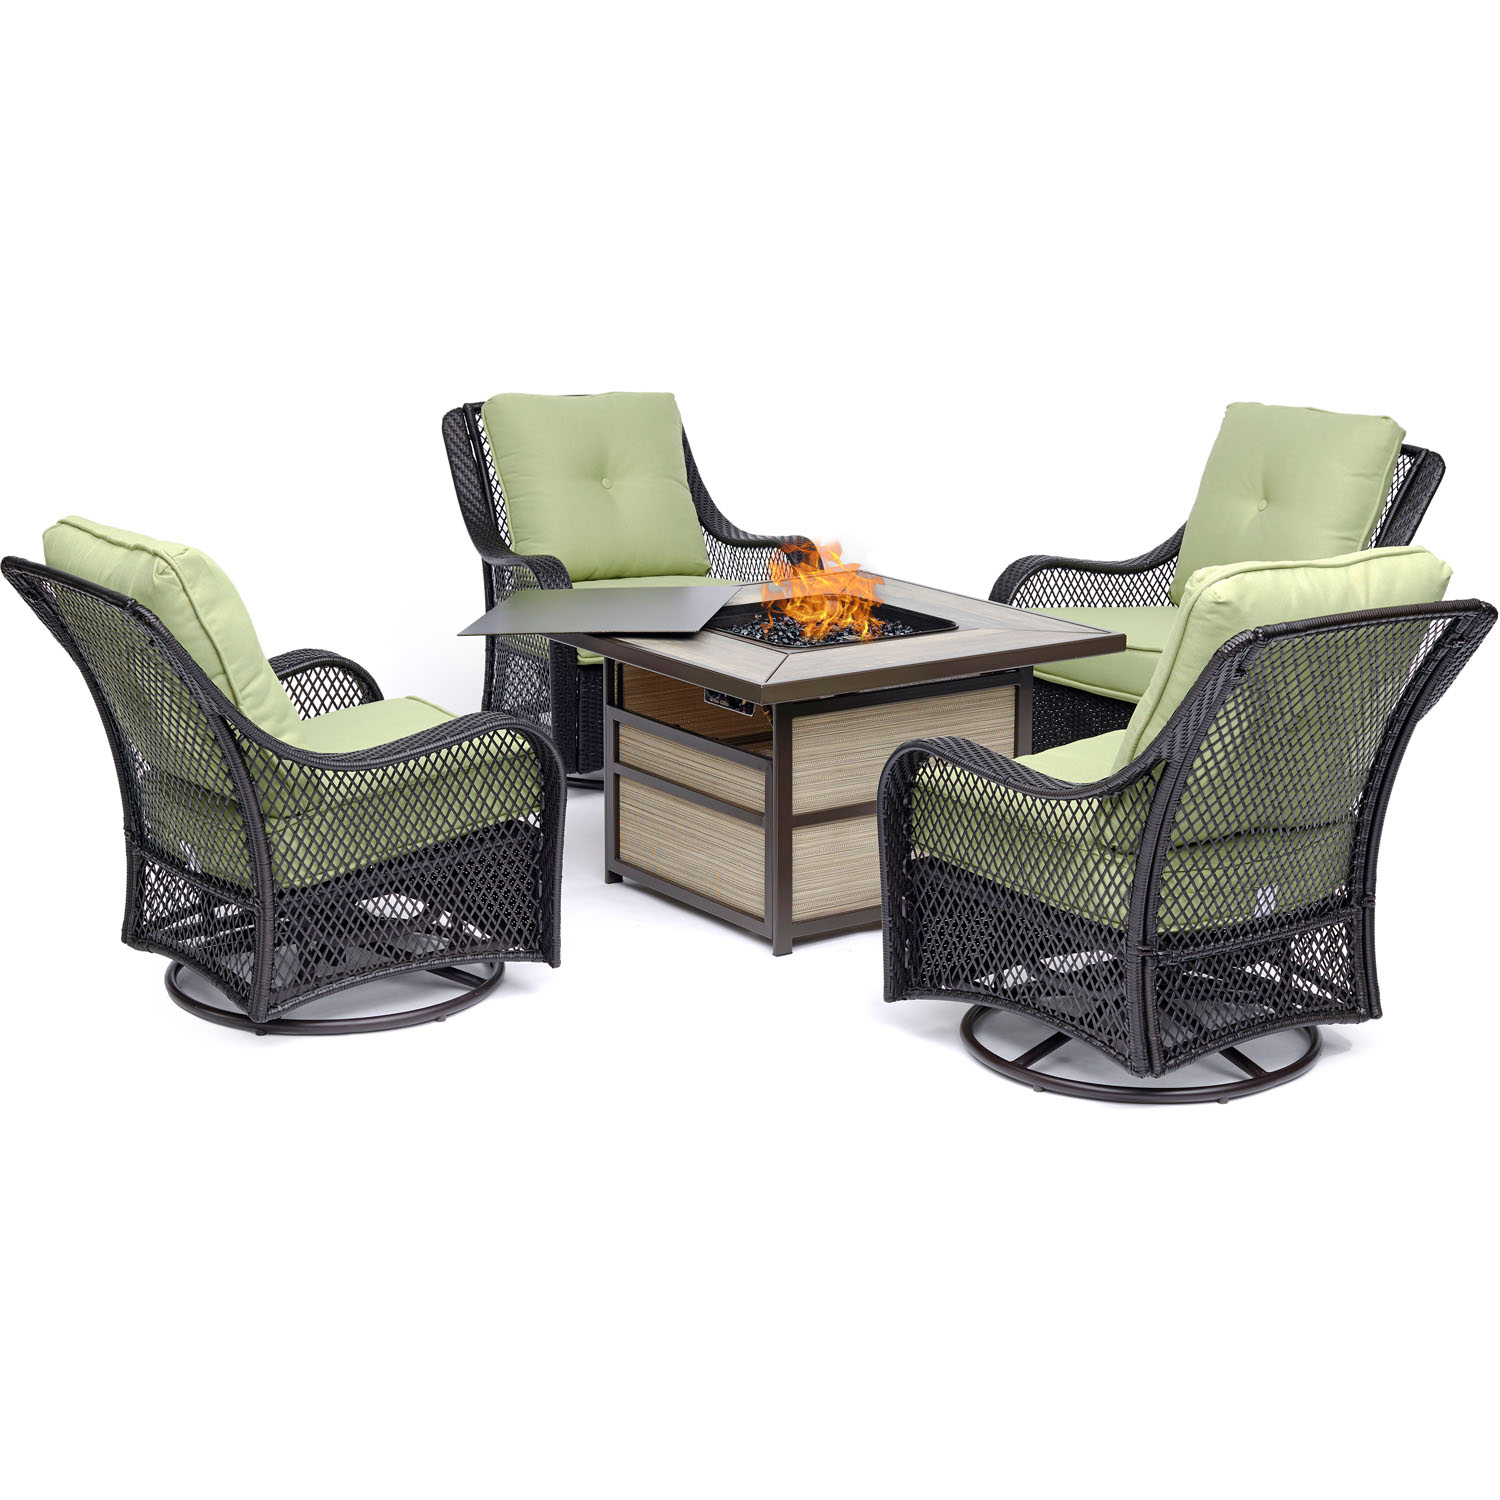 Hanover Orleans 5 Pcs Wicker and Steel Propane Fire Pit Chat Set, Avocado Green - image 1 of 9